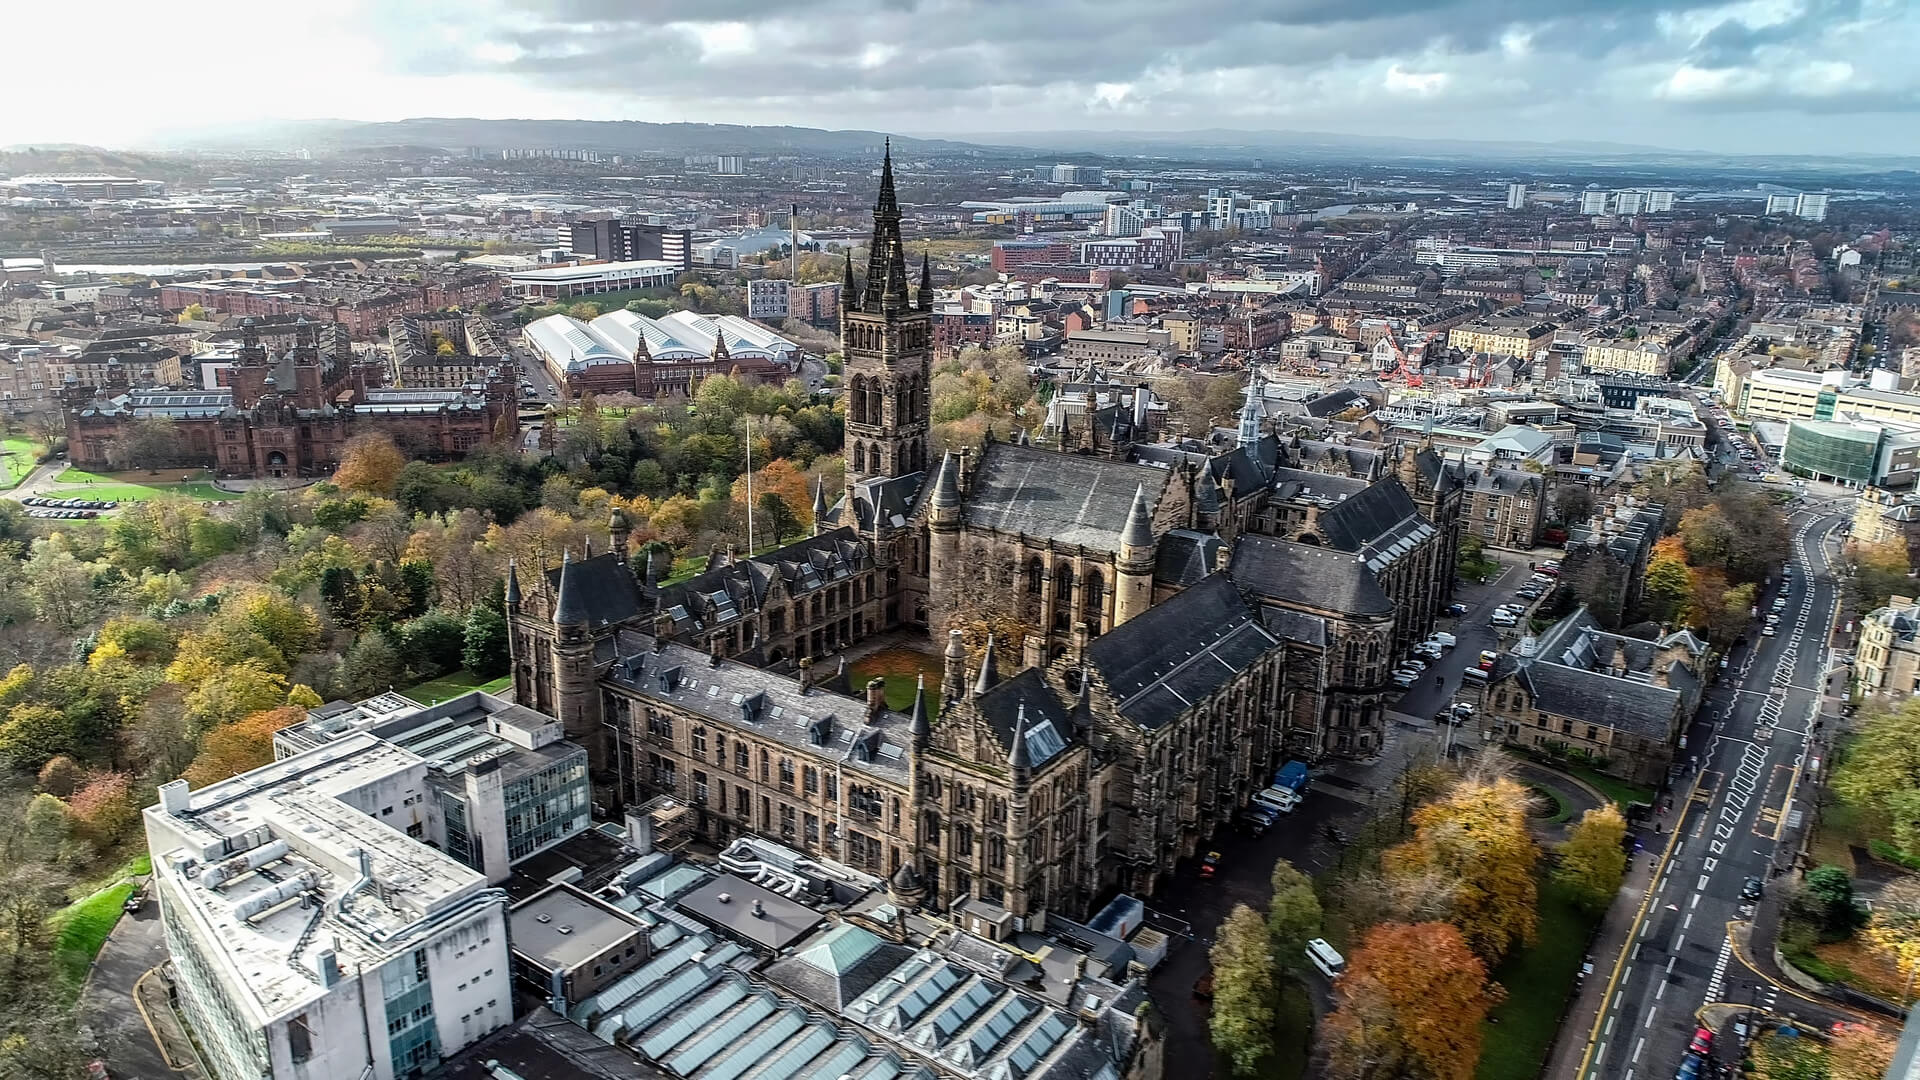 Low level aerial image over the autumn foliage of trees in Kelvingrove Park, Glasgow, to the gothic tower of Glasgow University with the cityscape behind.
